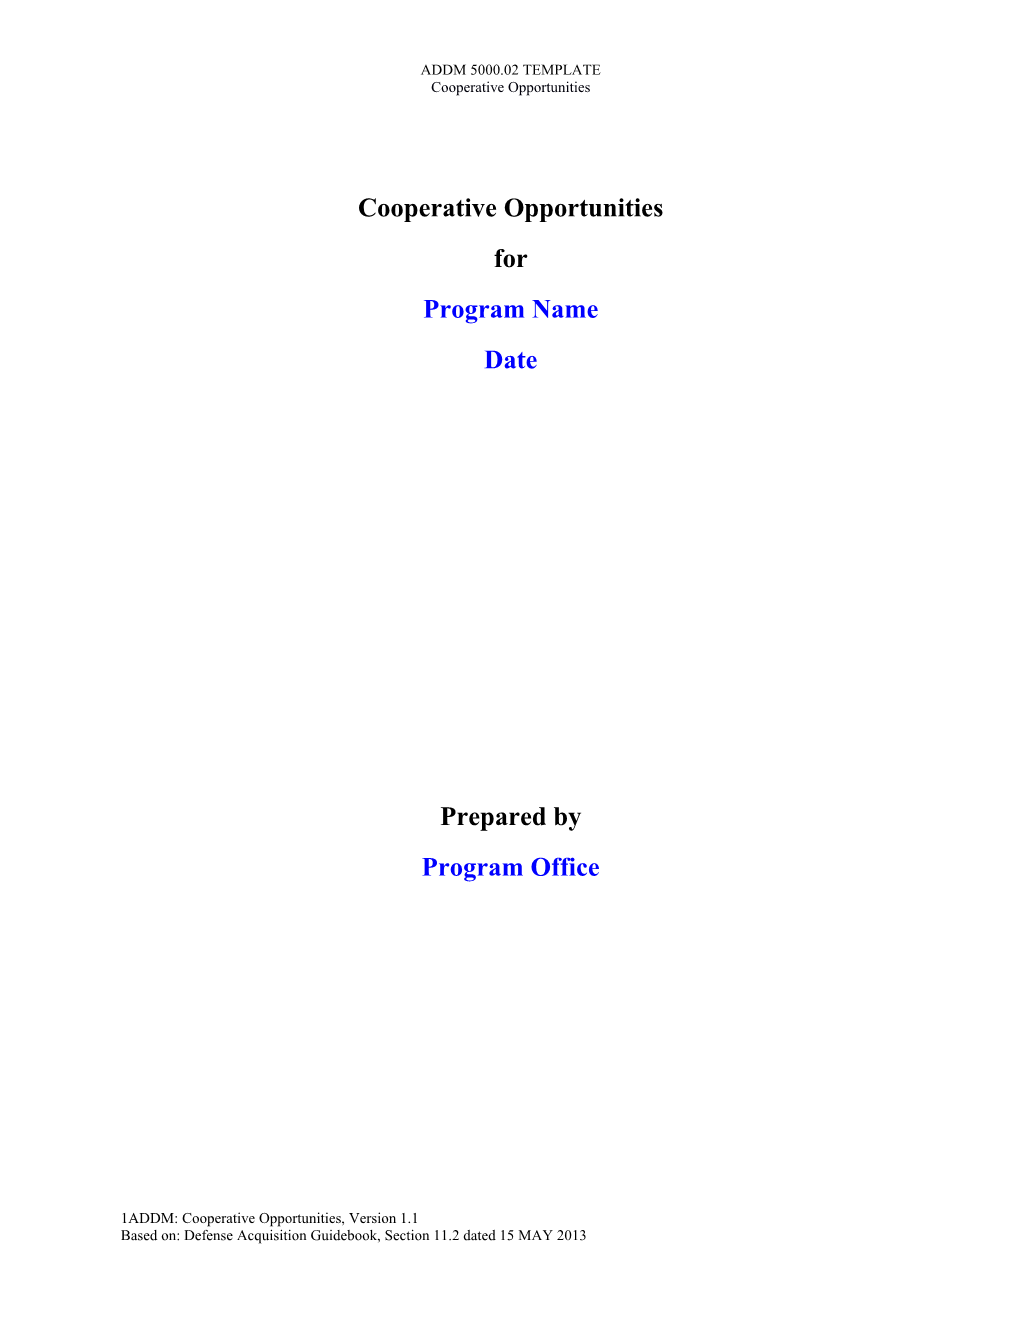 Cooperative Opportunities ADDM Template V 1.1